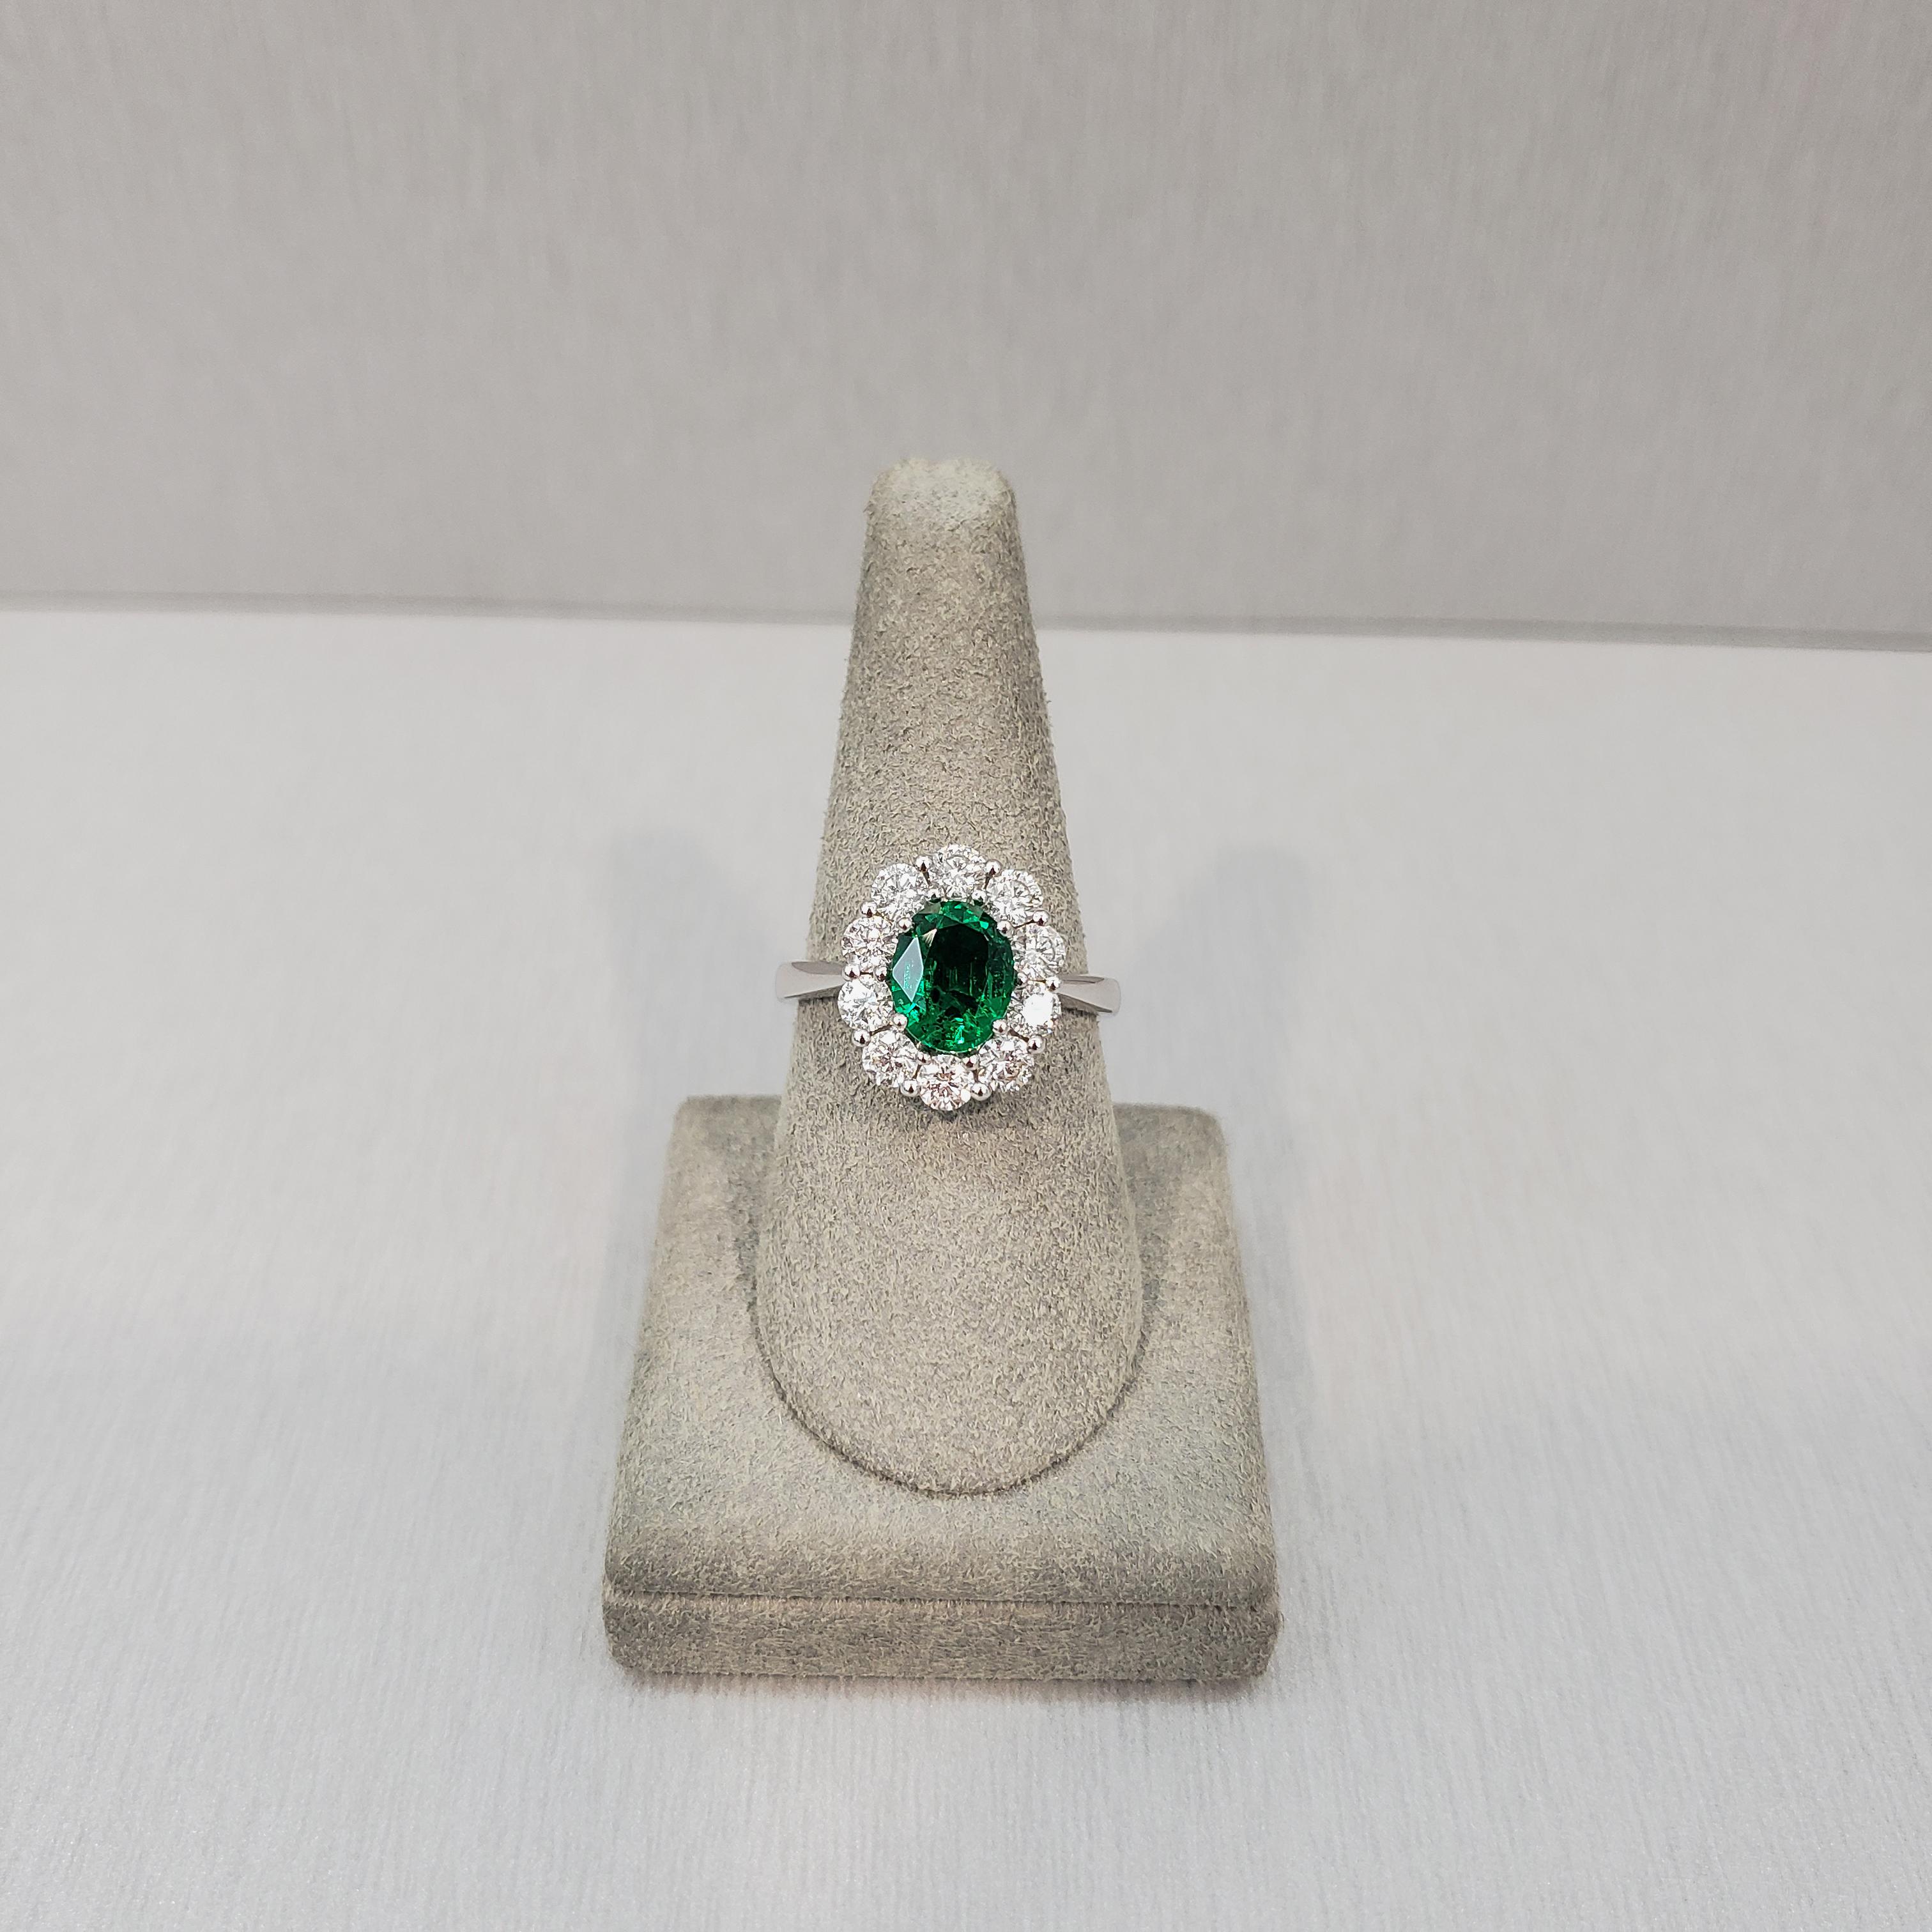 Contemporary Roman Malakov 1.12 Carat Oval Cut Green Emerald and Diamond Halo Engagement Ring For Sale